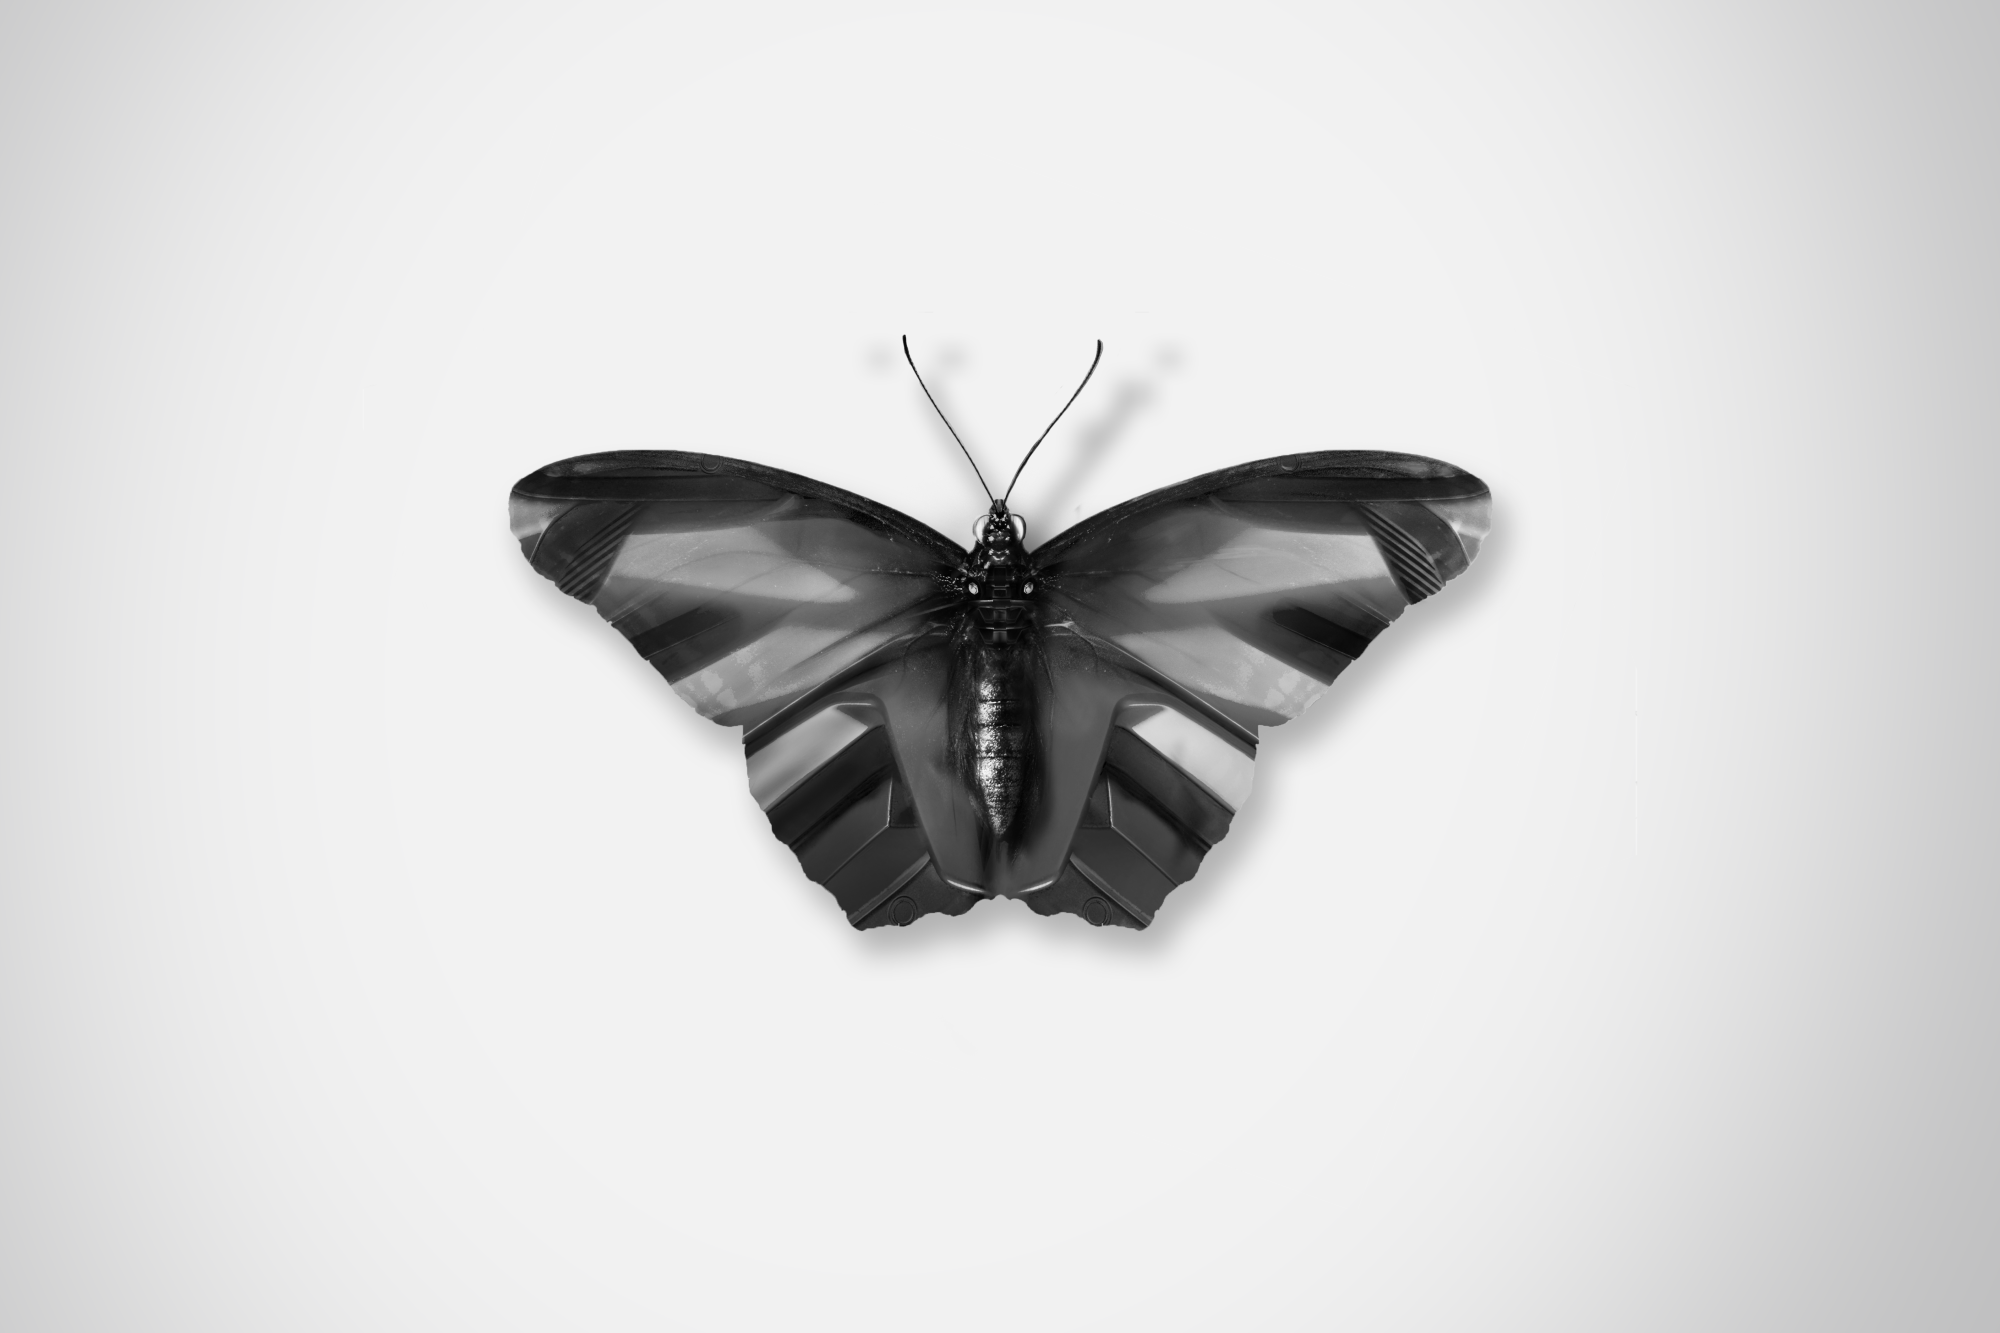 Ford_Butterflies_Concept_The_Beauty_Of_Change_DKLG_Design_010.png